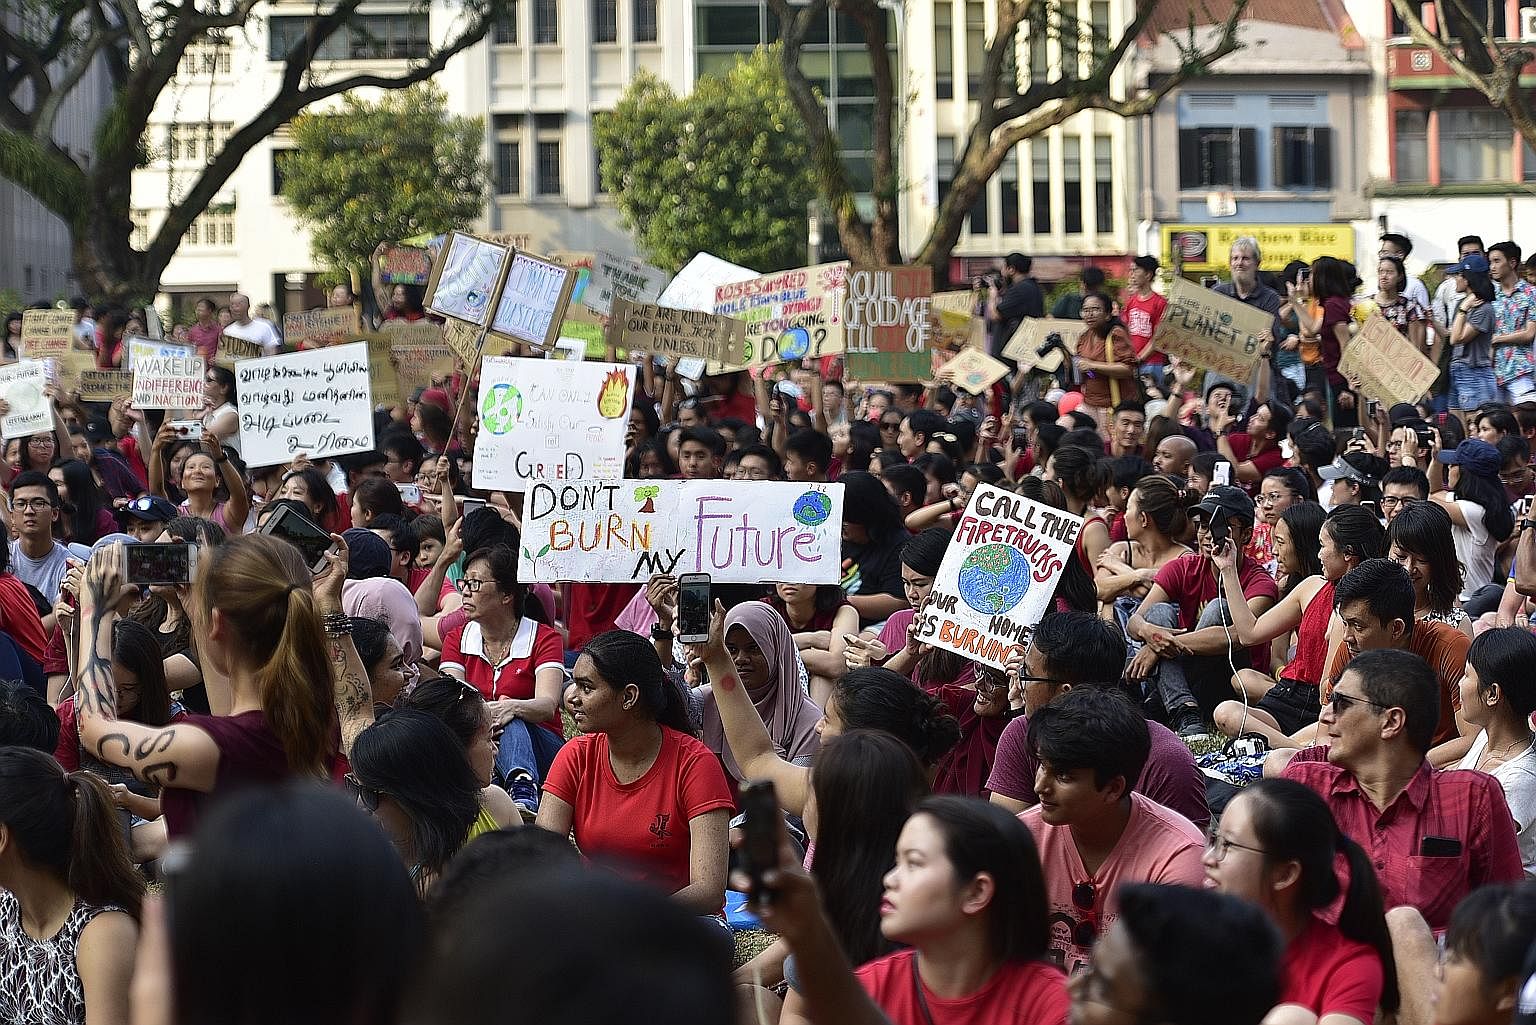 Participants rallying for more action on climate change at Hong Lim Park yesterday. Clad in red for the rally, they held up banners, such as "no planet B", "no beer on a dead planet", "respect your mother (earth)" and "I stand for what I stand on", a